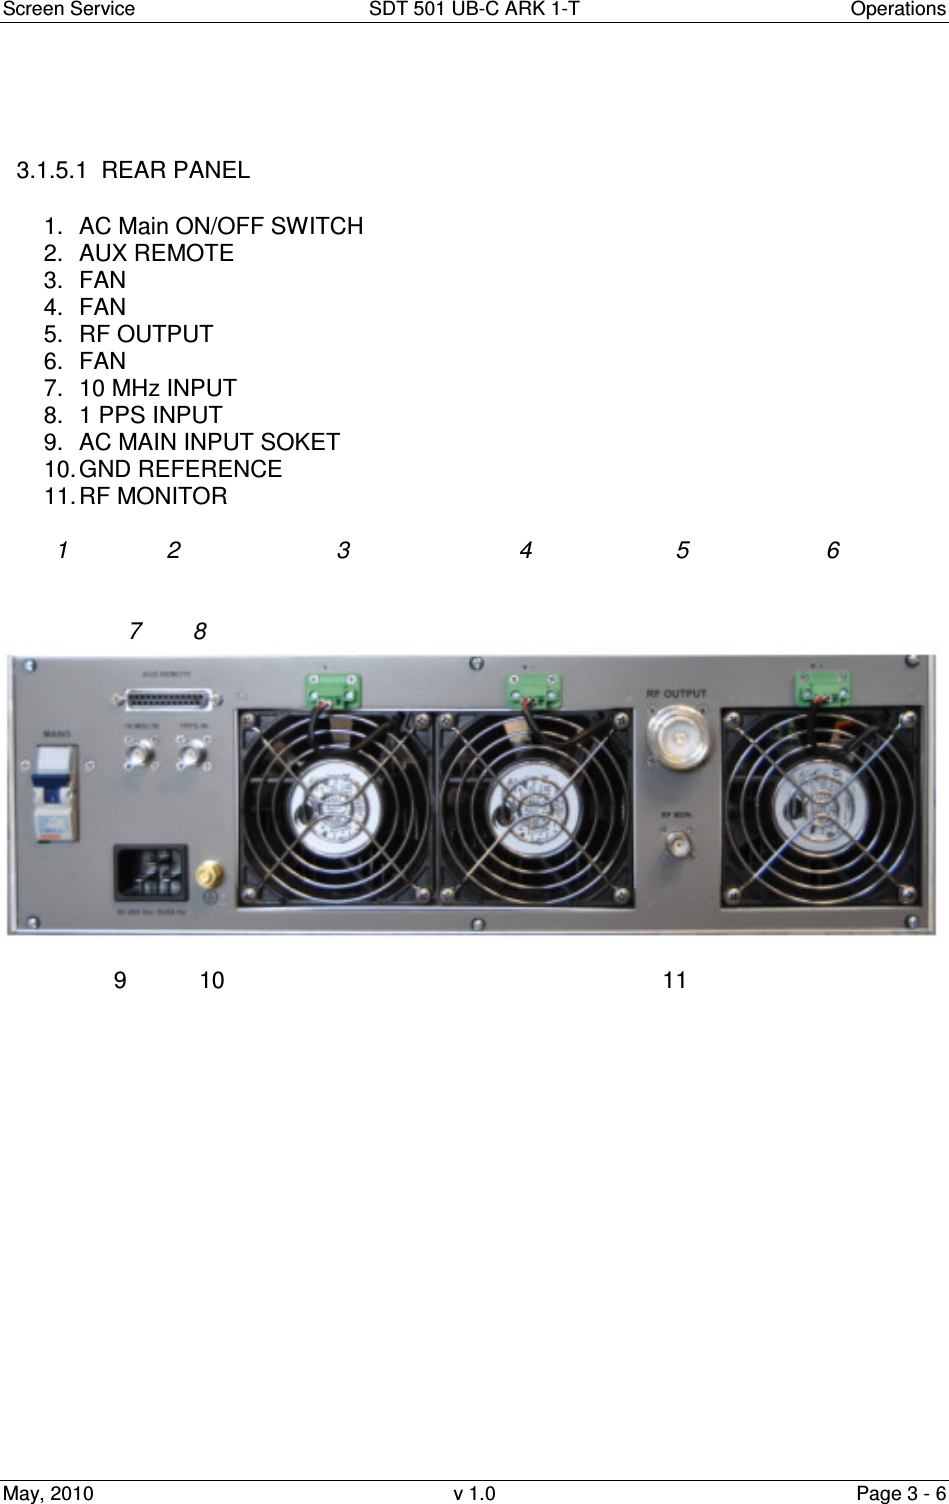 Screen Service  SDT 501 UB-C ARK 1-T  Operations May, 2010  v 1.0  Page 3 - 6    3.1.5.1  REAR PANEL  1.  AC Main ON/OFF SWITCH 2.  AUX REMOTE 3.  FAN 4.  FAN 5.  RF OUTPUT  6.  FAN 7.  10 MHz INPUT 8.  1 PPS INPUT 9.  AC MAIN INPUT SOKET 10. GND REFERENCE 11. RF MONITOR           1               2                        3                          4                      5                     6                               7        8                    9           10                                                                   11                                                                     